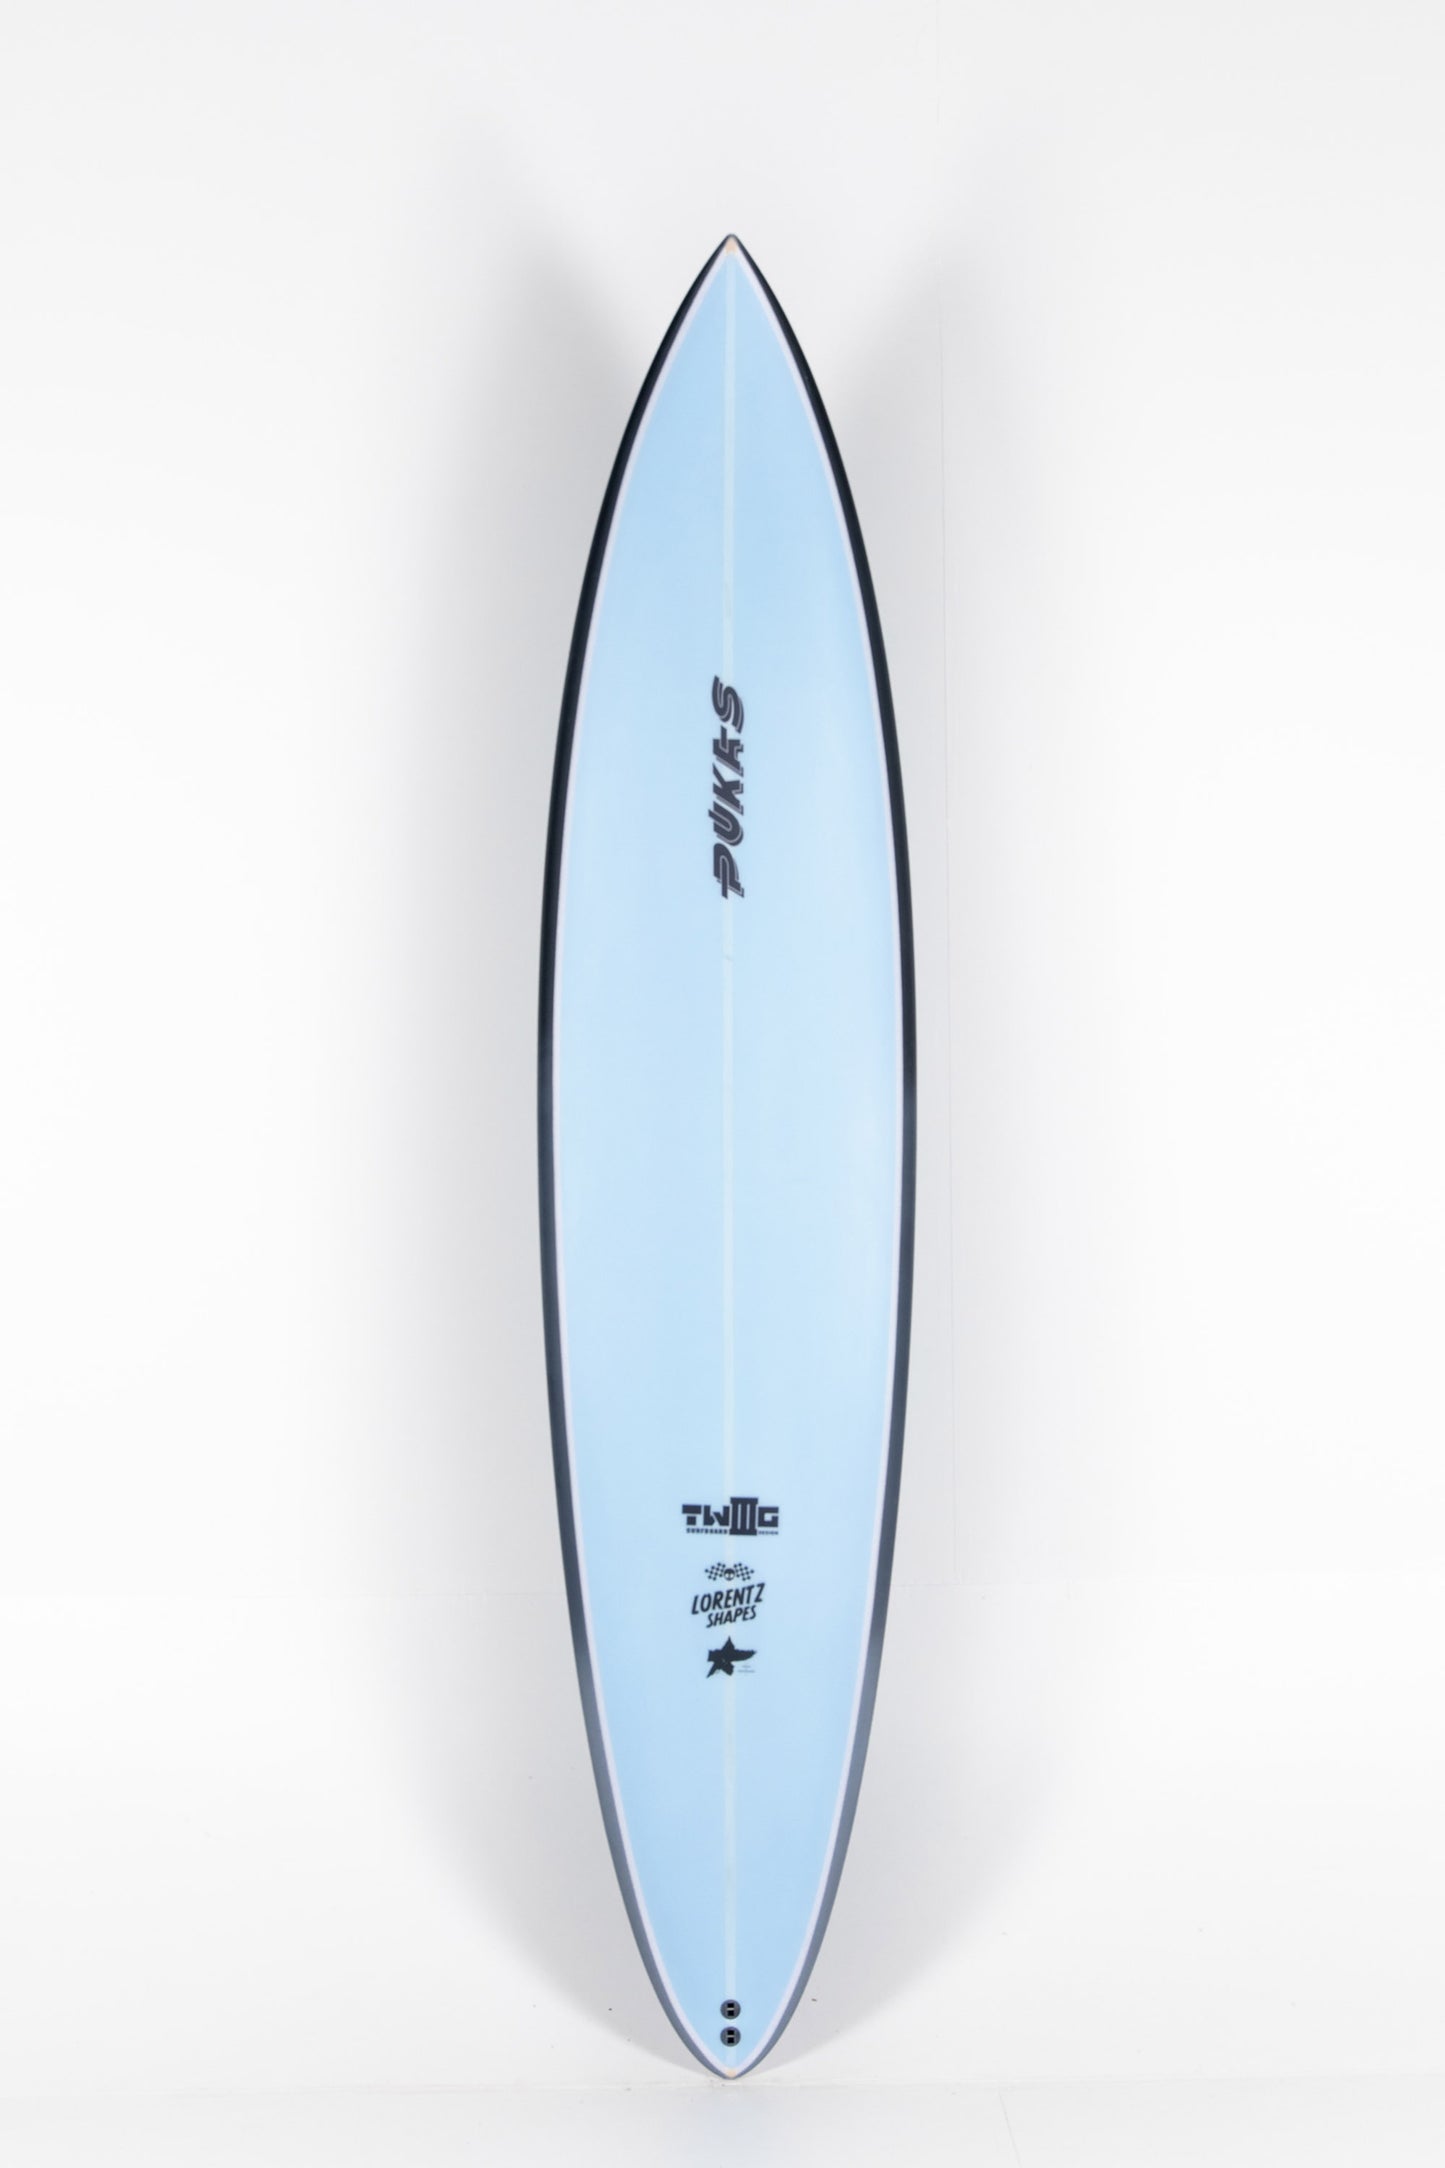 Pukas Surf Shop - Pukas Surfboard - TWIG CHARGER by Axel Lorentz - 8´0” x 20 1/8 x 3 1/4 - 53L  AX04827